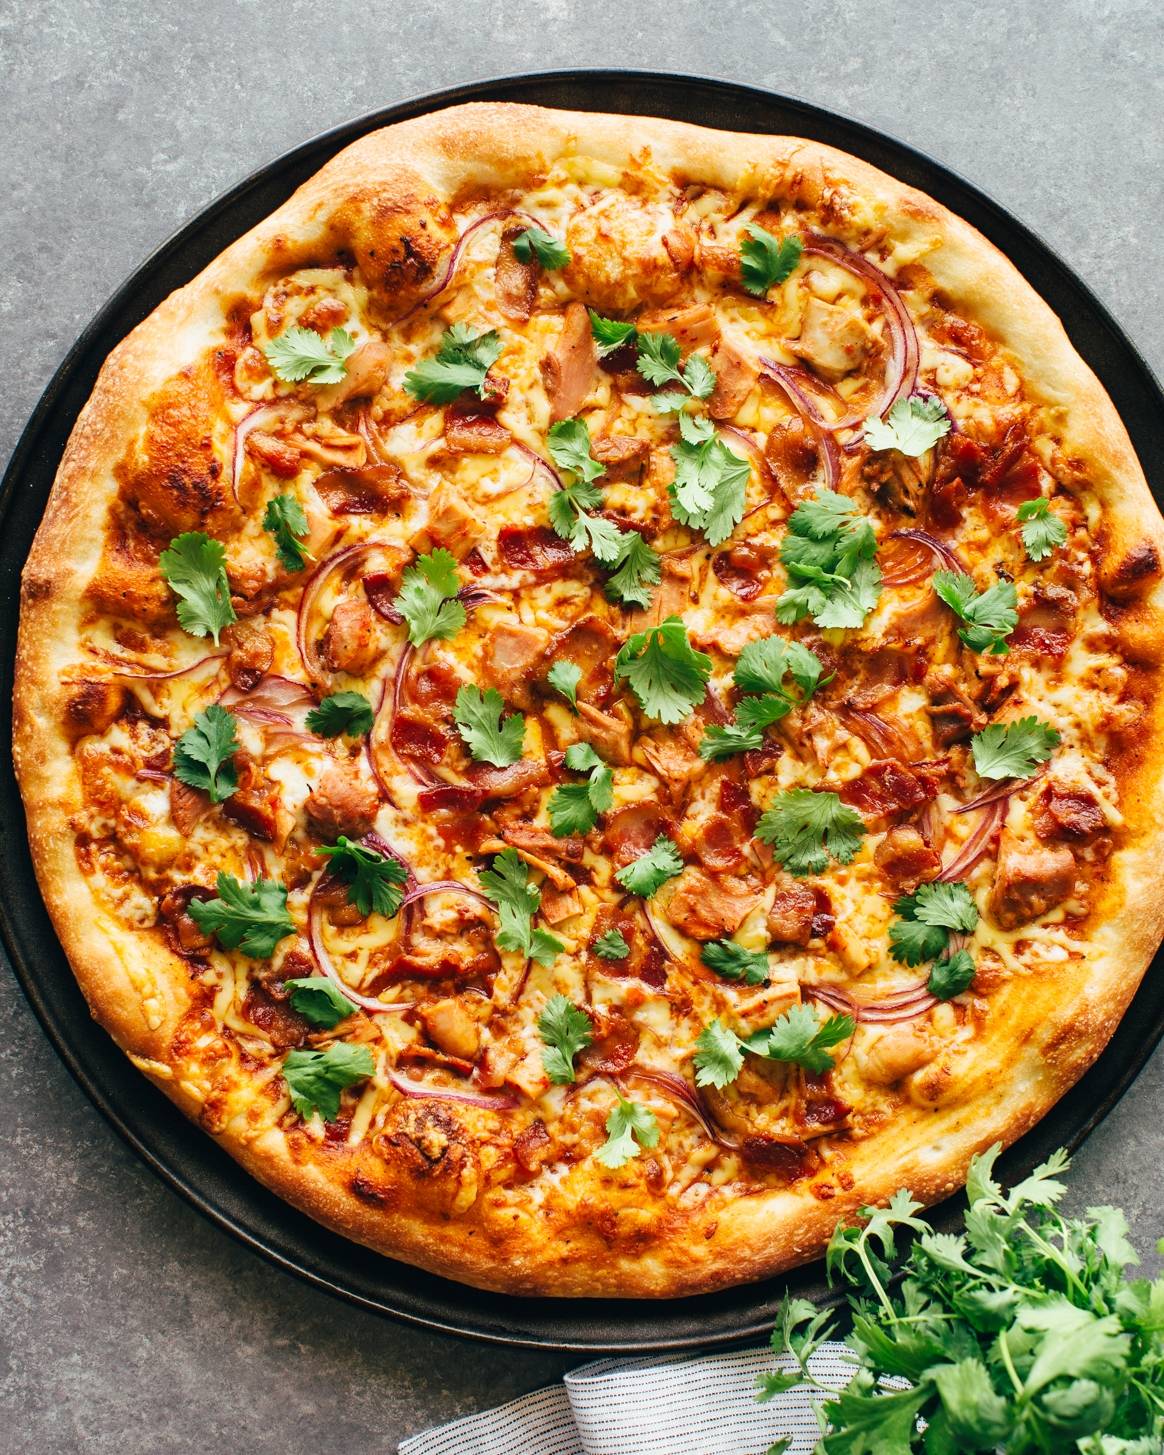 How to Make a Delicious BBQ Chicken Pizza